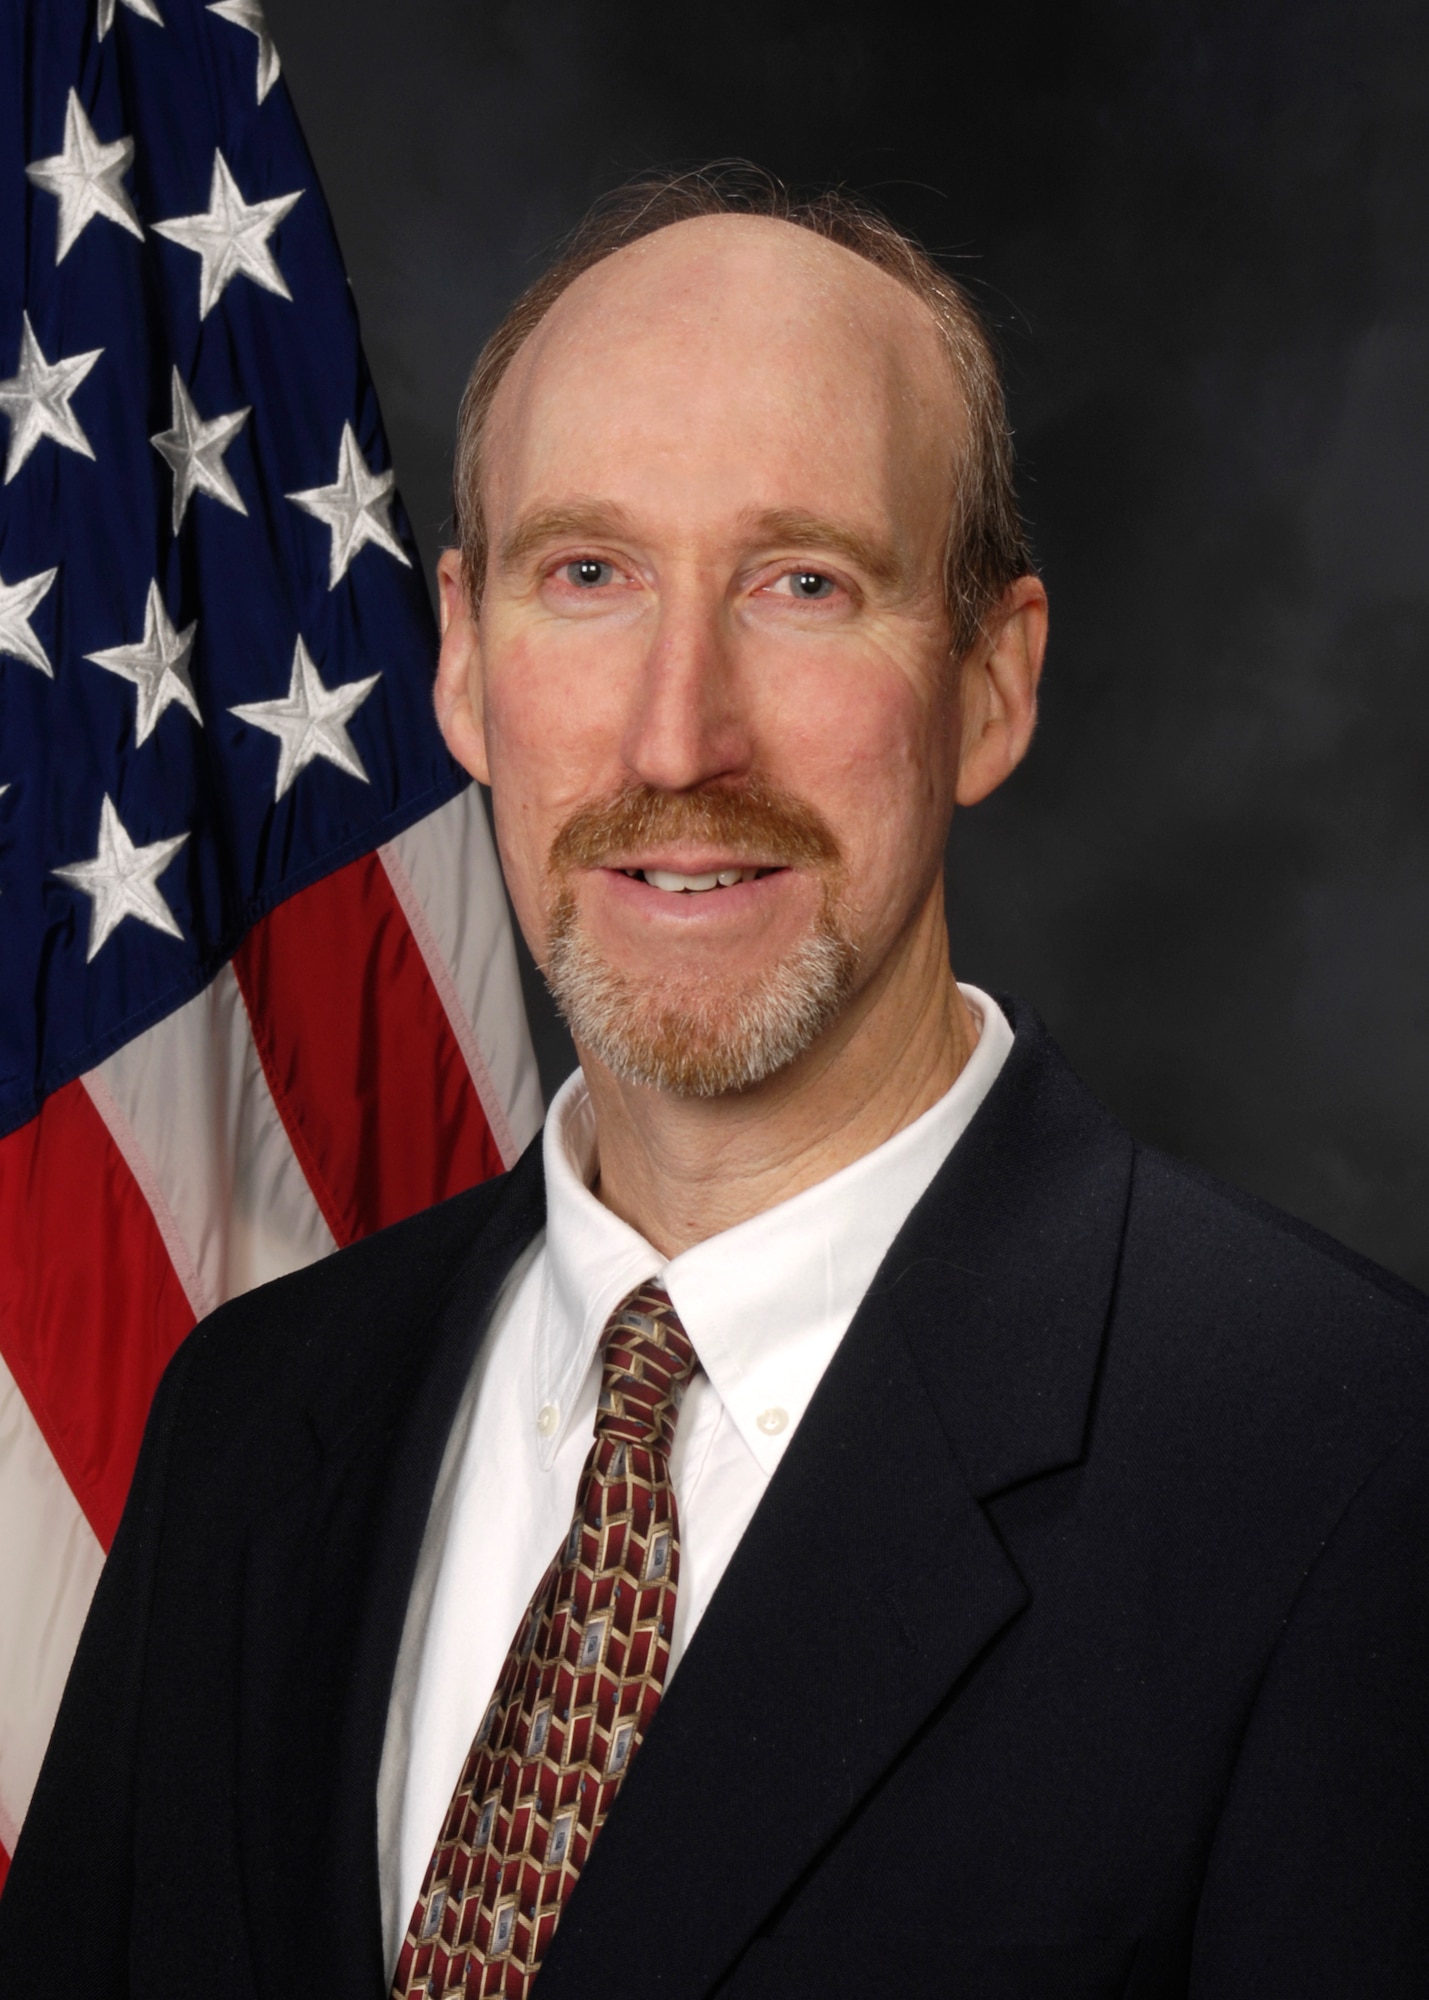 Paul M. Keenan, Air Force Institute of Technology, is the Air University Category III Civilian of the Year for 2008. (Air Force photo)